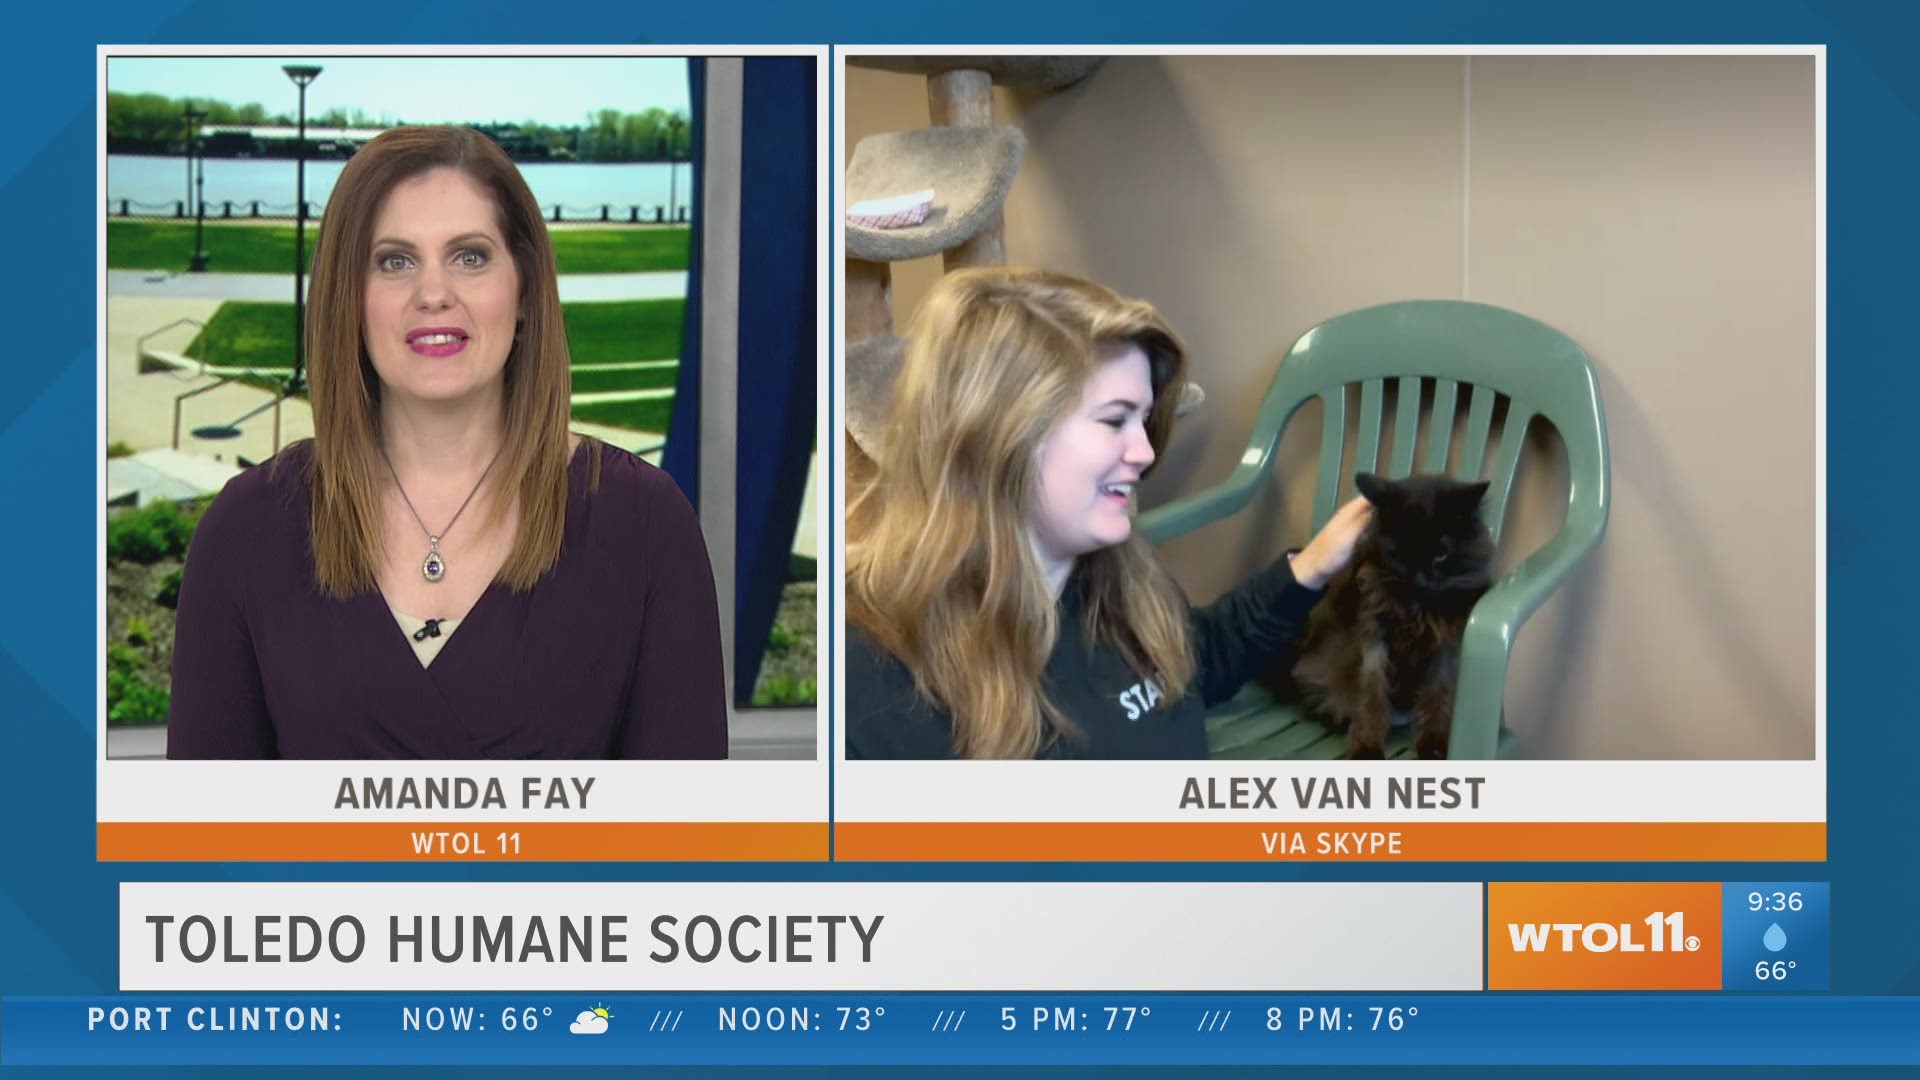 Online adoptions and curbside pickup are available at Toledo Humane Society!